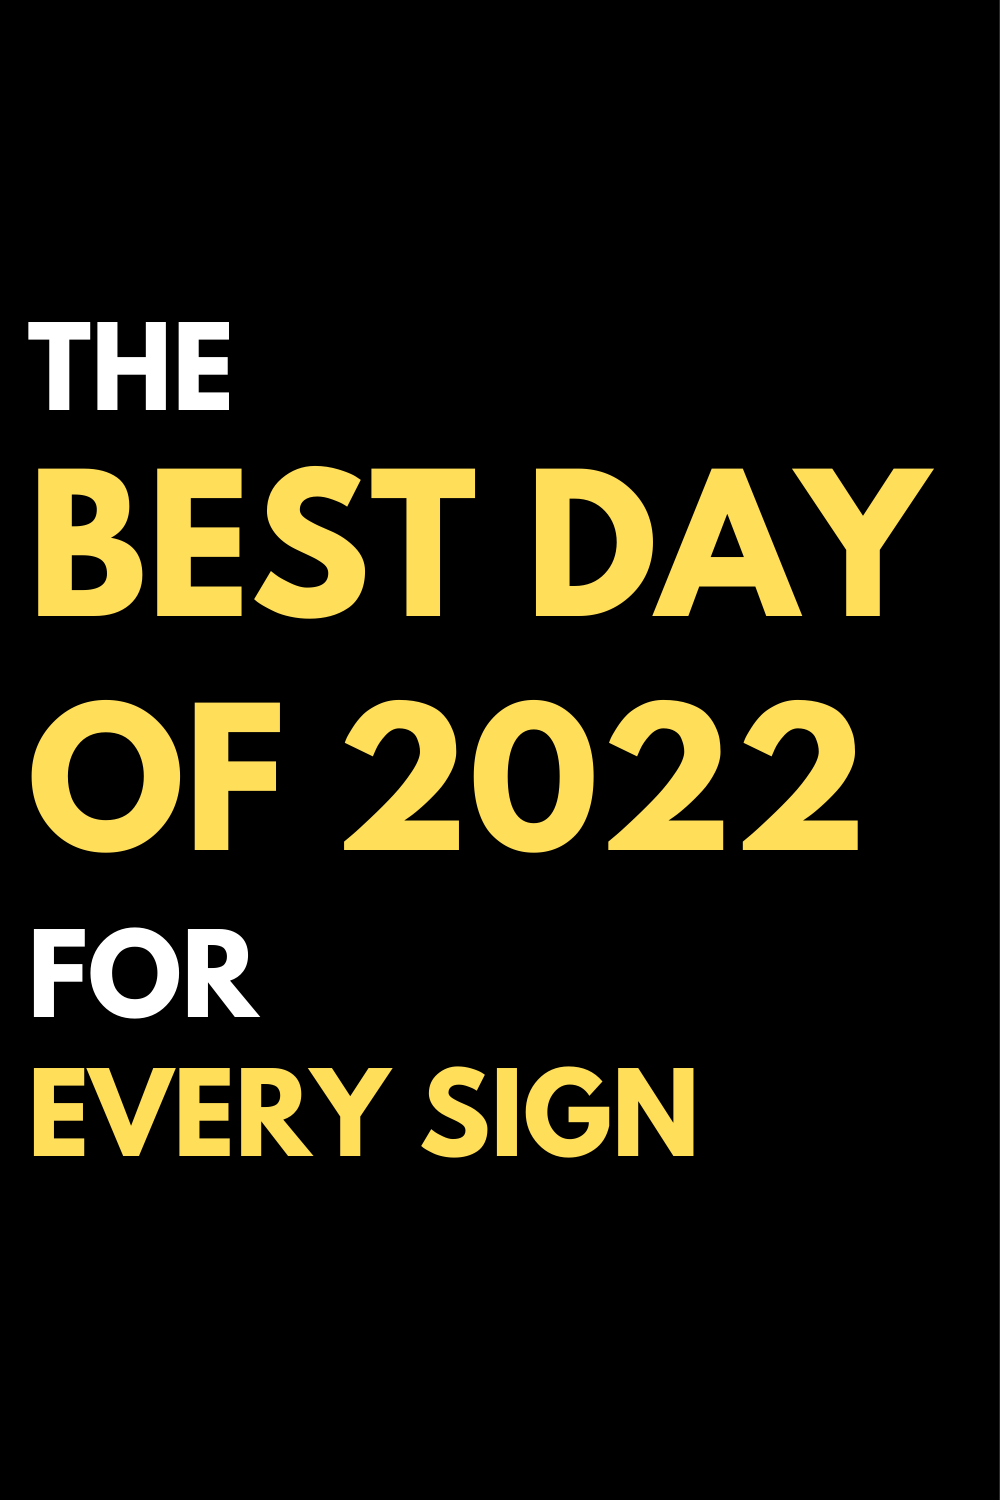 The best day of 2022 for every sign